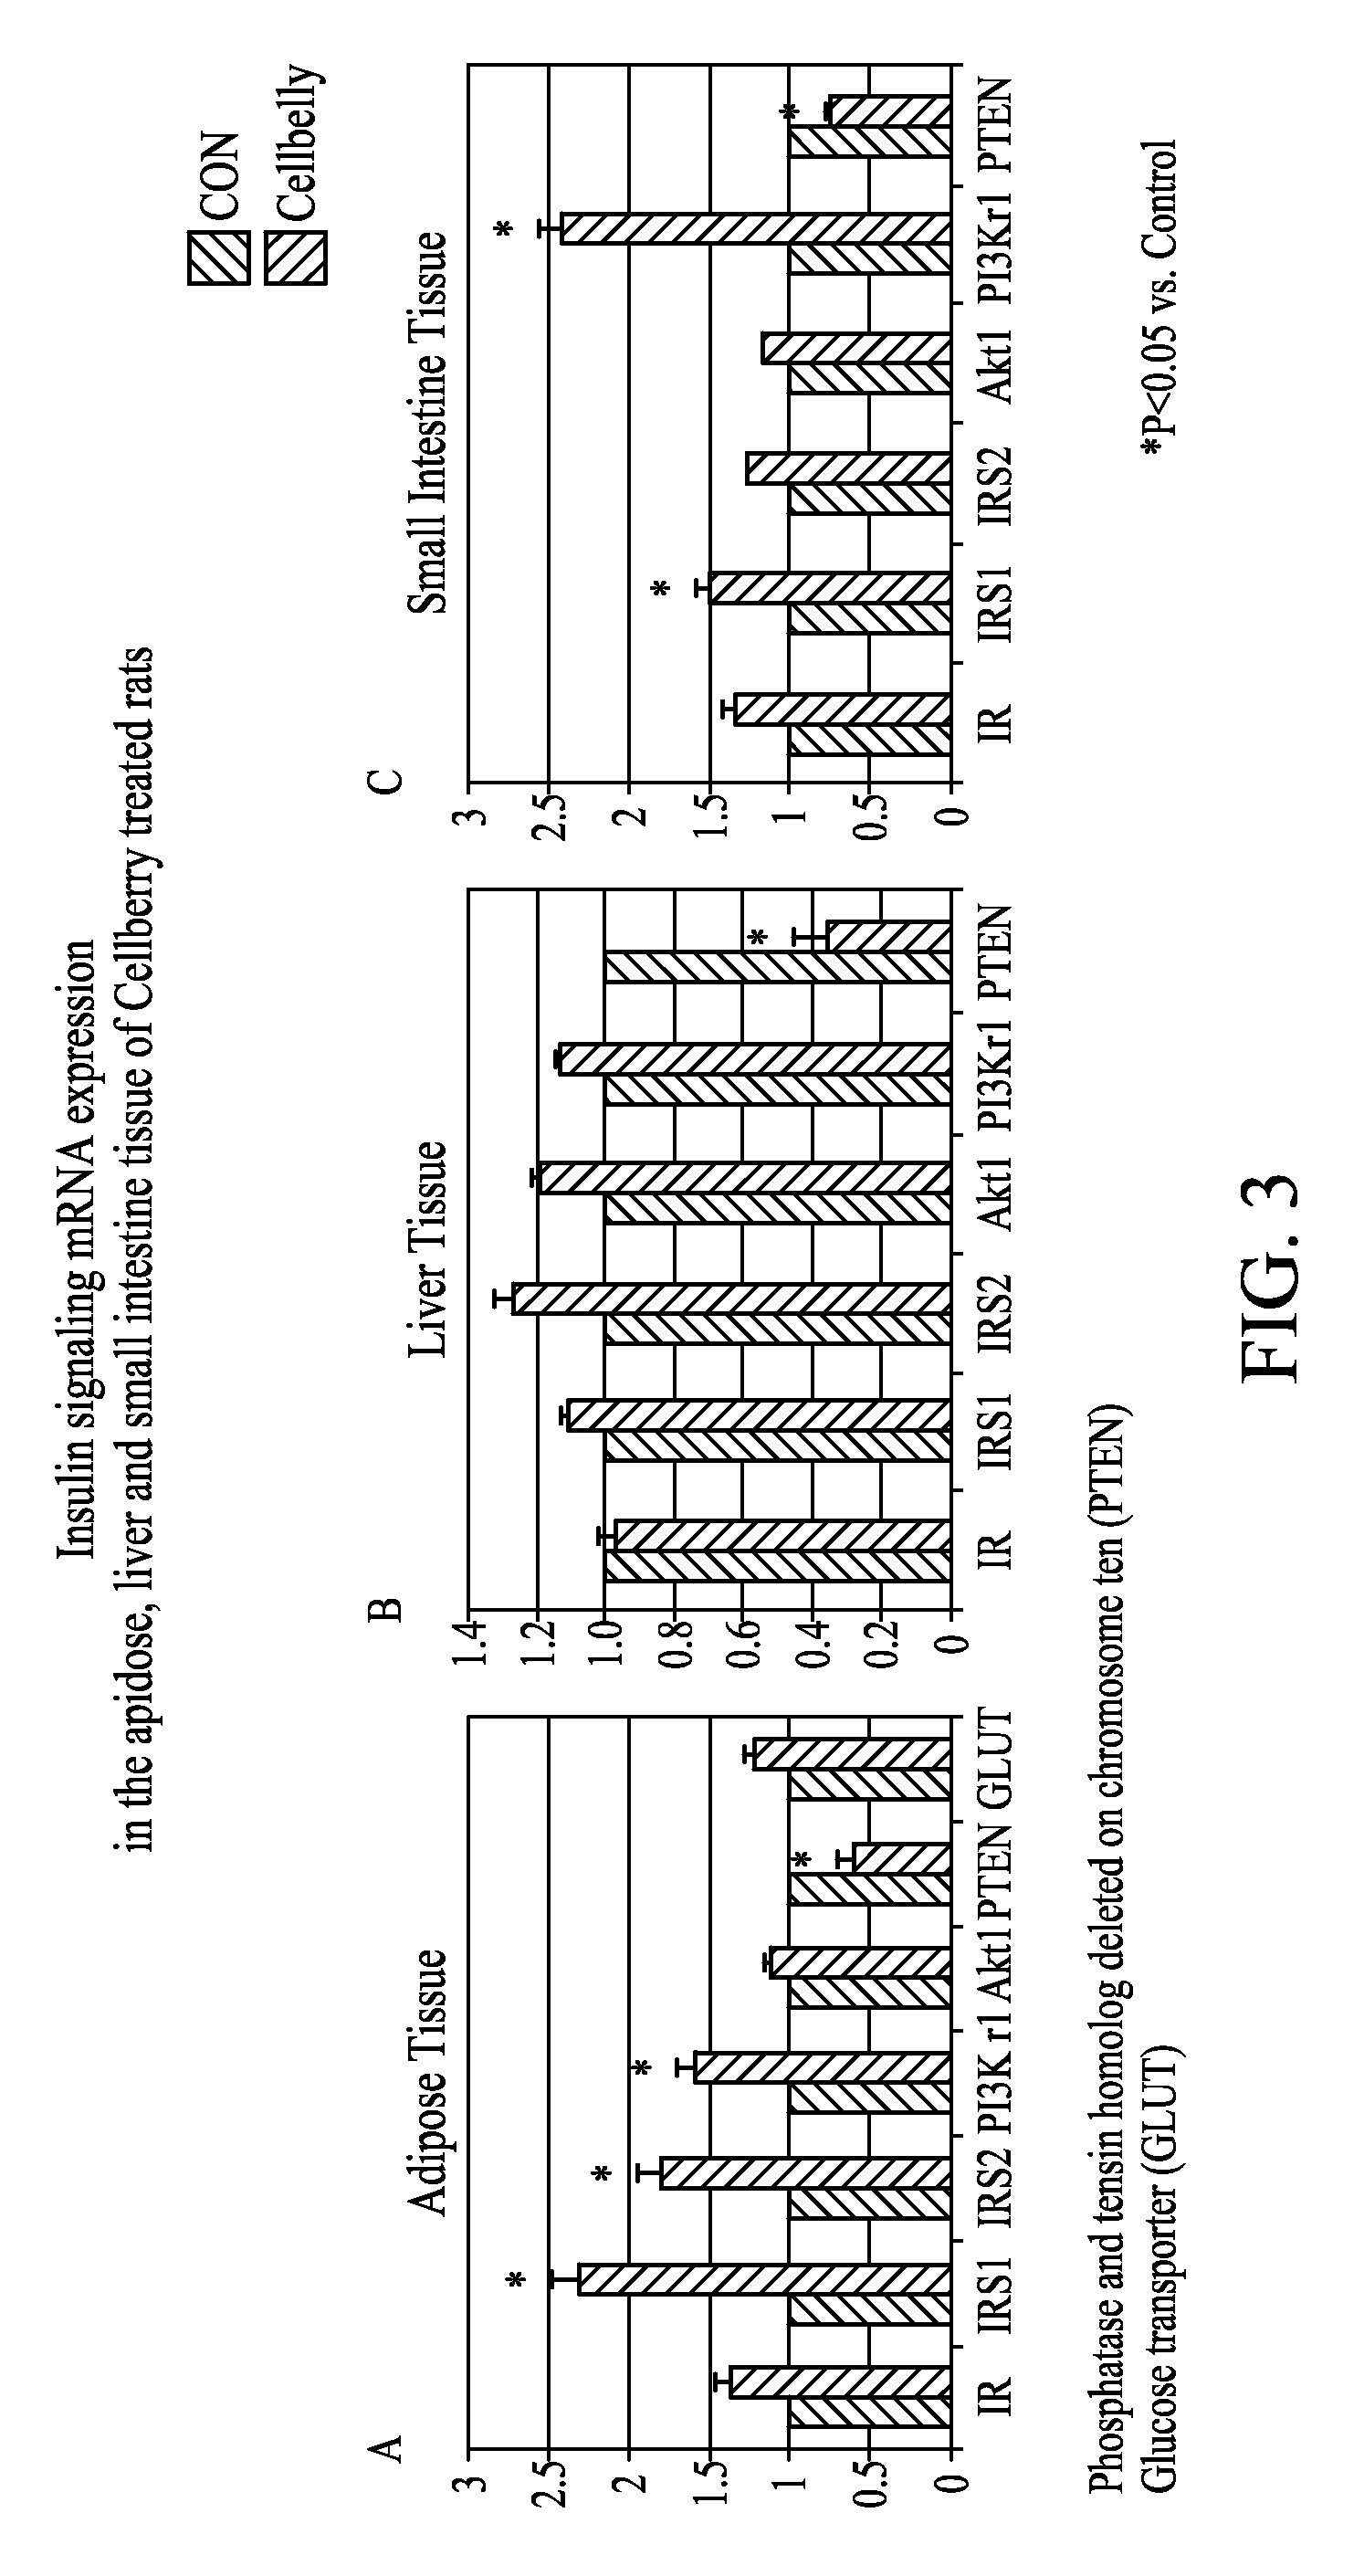 Dietary supplements containing extracts of aronia and methods of using same to promote weight loss